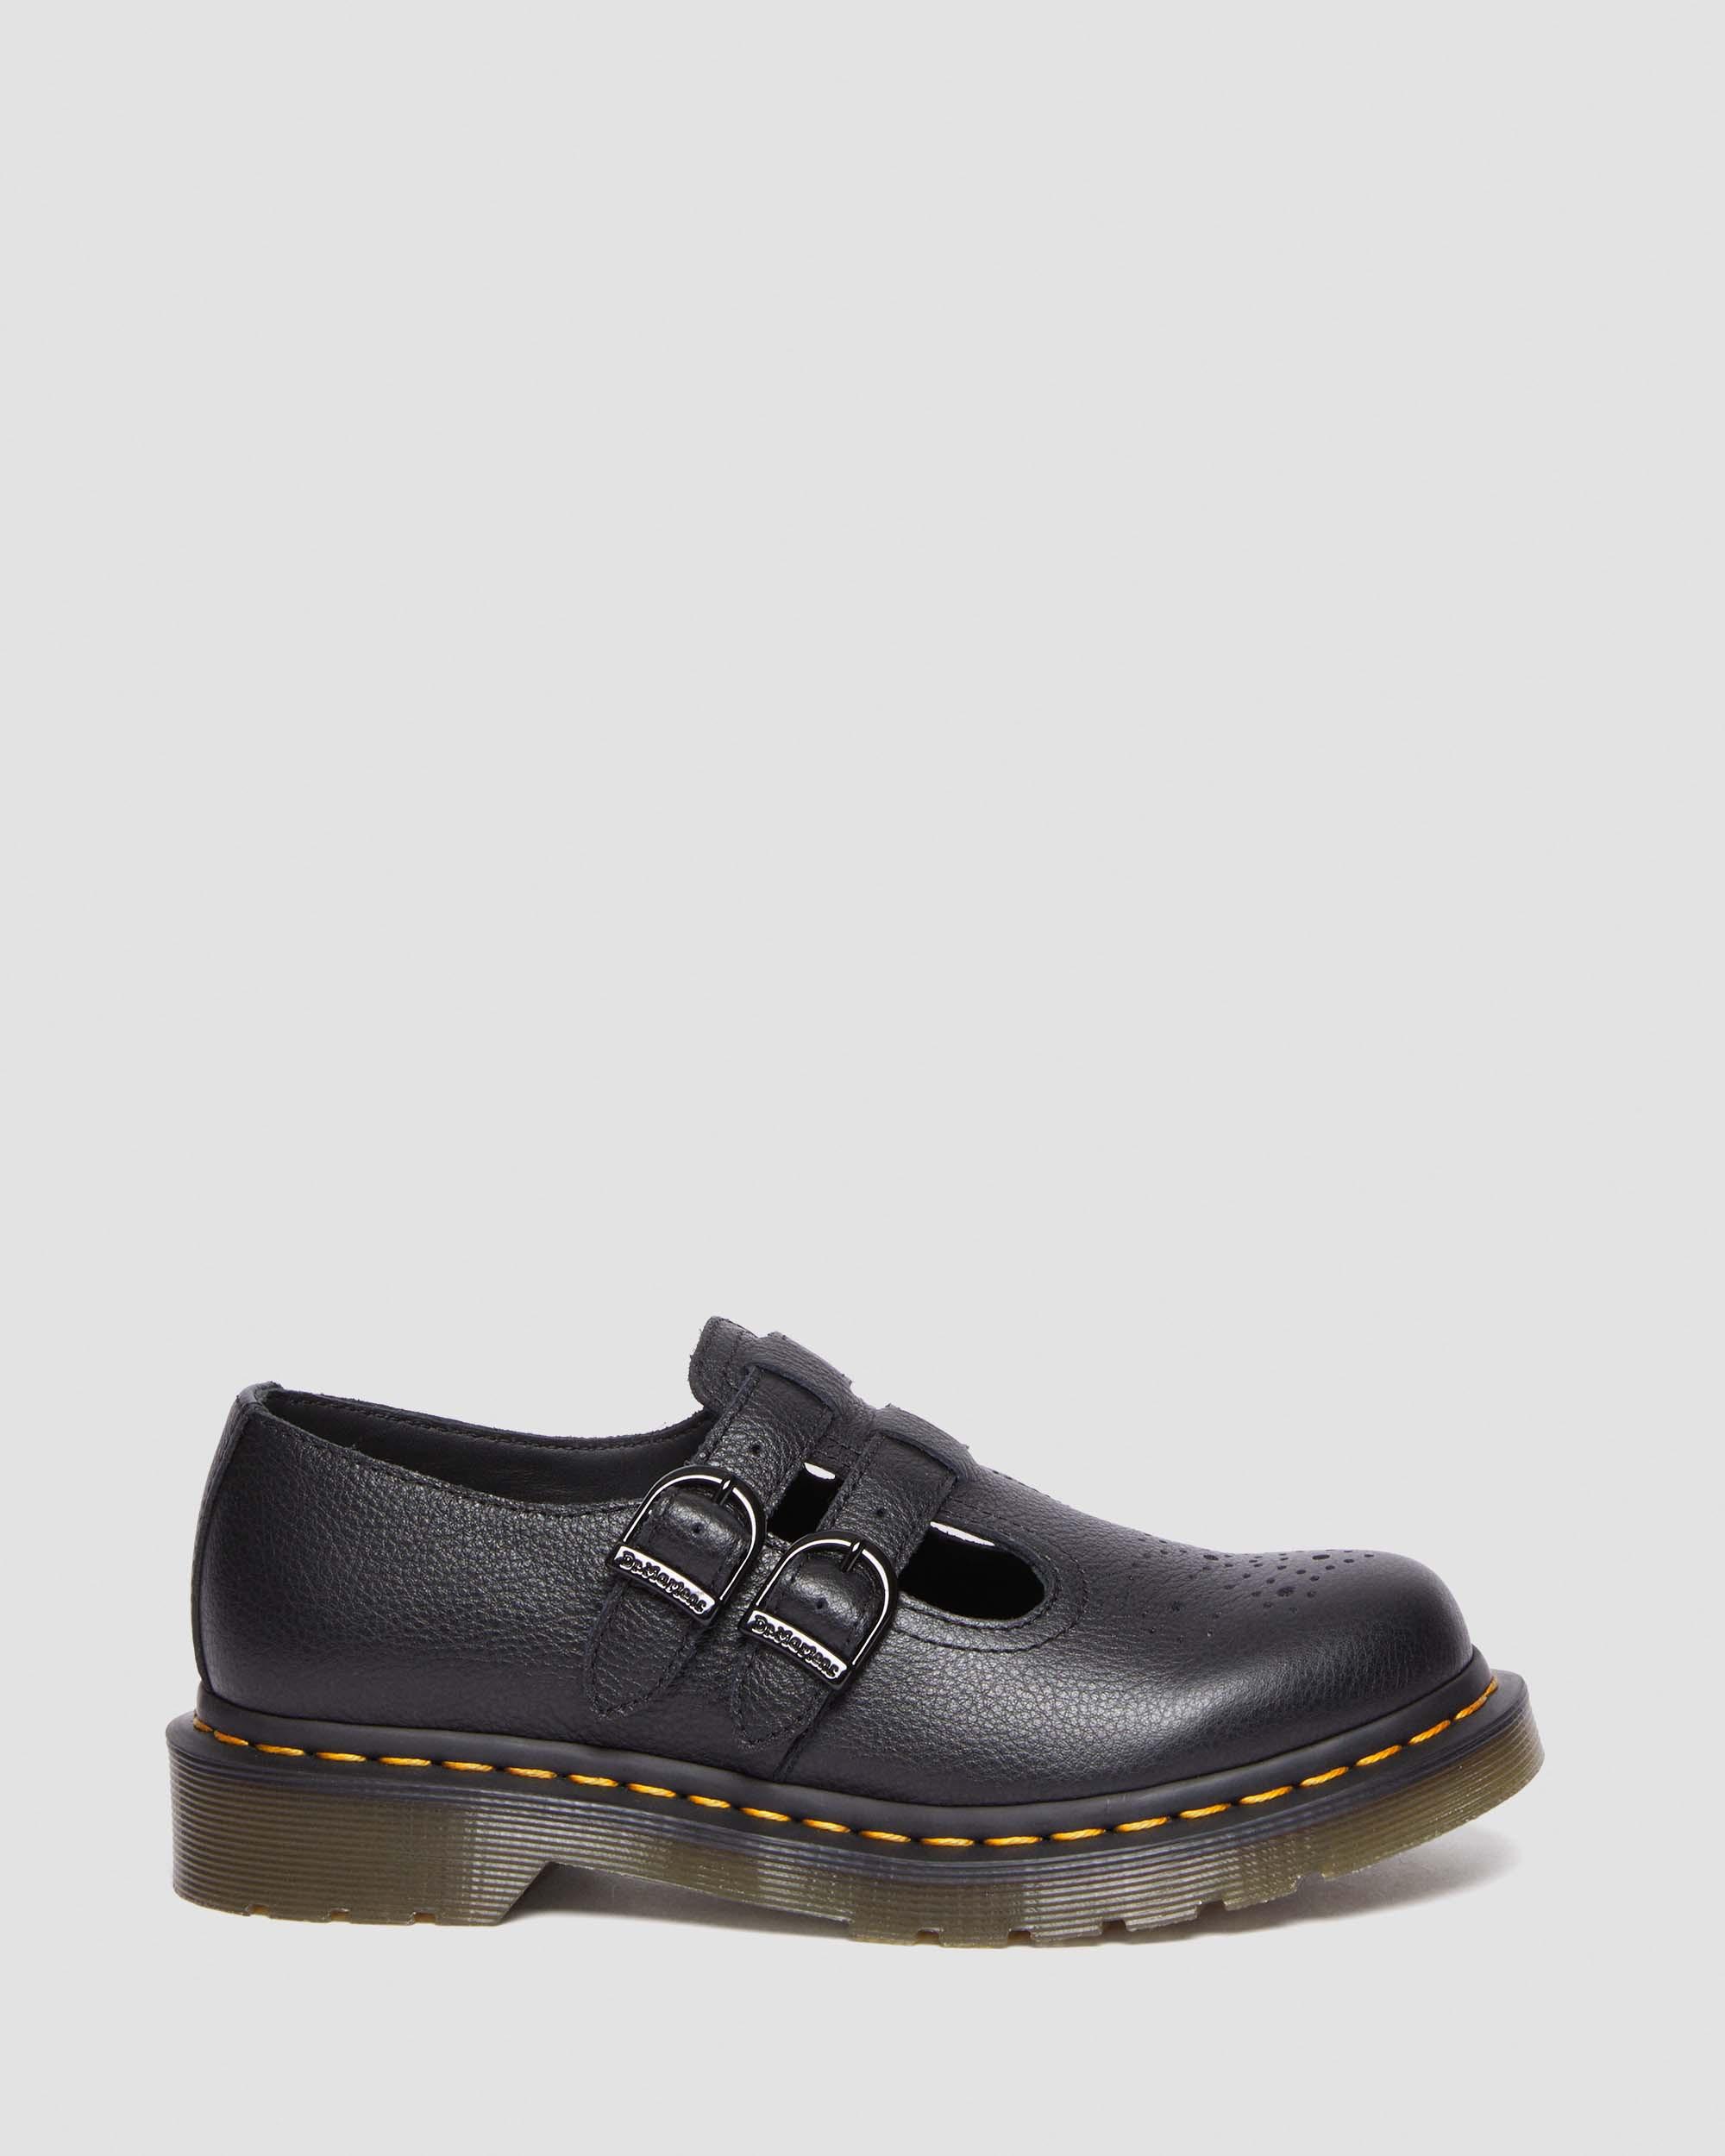 8065 Virginia Leather Mary Jane Shoes in Black | Dr. Martens